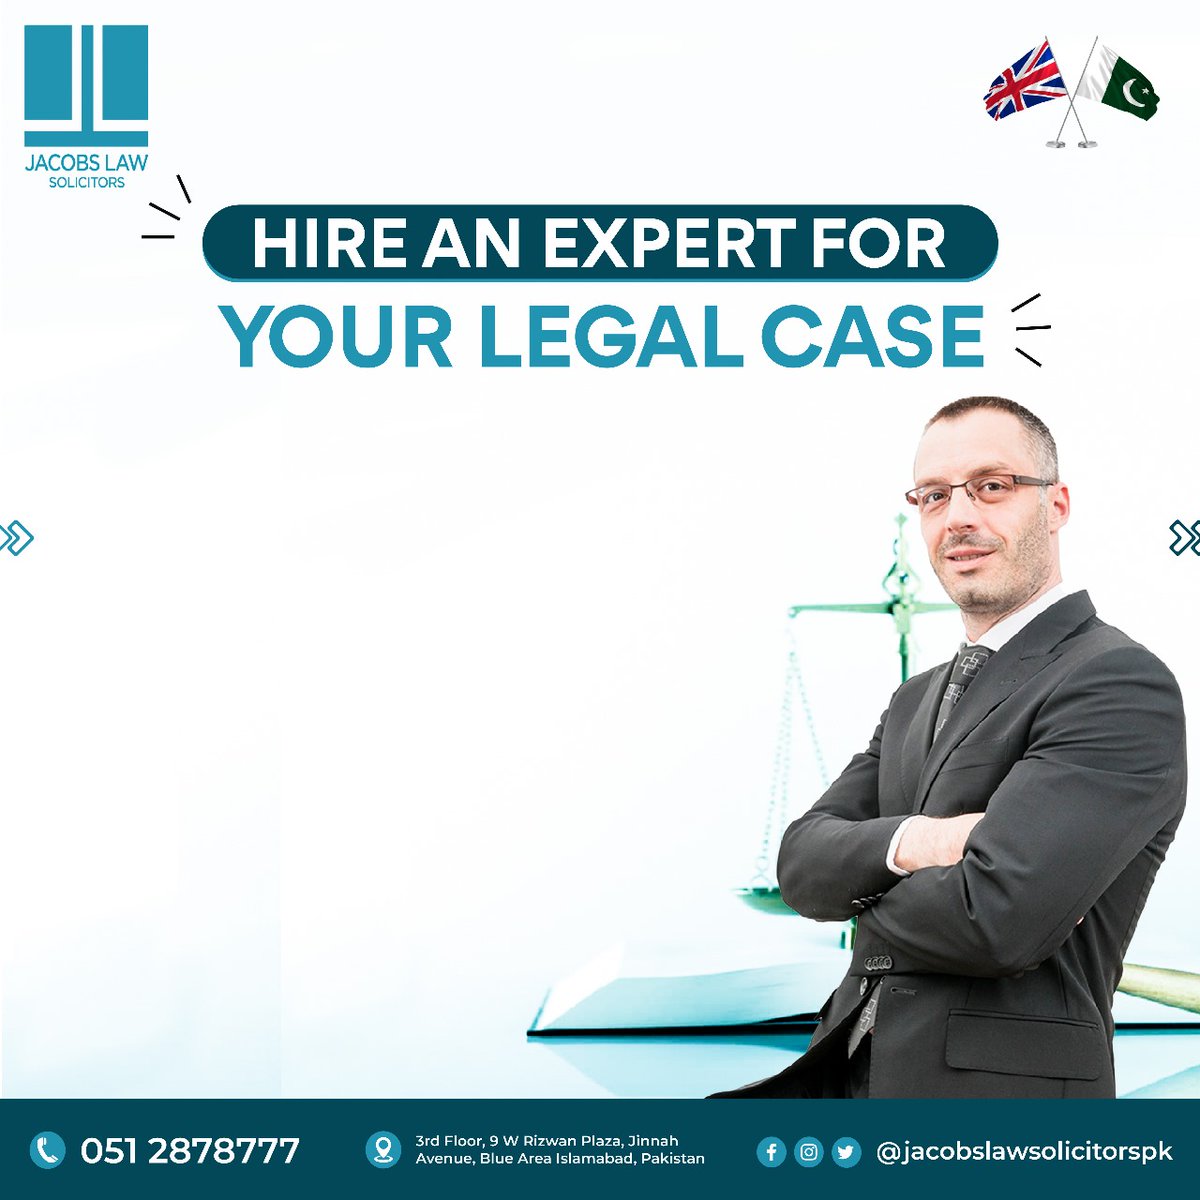 Hire Our Solicitors & Experts For Your Legal Case In UK...!

𝐖𝐡𝐚𝐭𝐬𝐀𝐩𝐩:
+923460573438

#JacobsLaw #JacobsLawSolicitors #WorkinUK #law #lawfirm #immigration #immigrationrights #SkilledWorkVisa #immigrationuk #immigrationconsultant #ukvisaapplication #islamabad